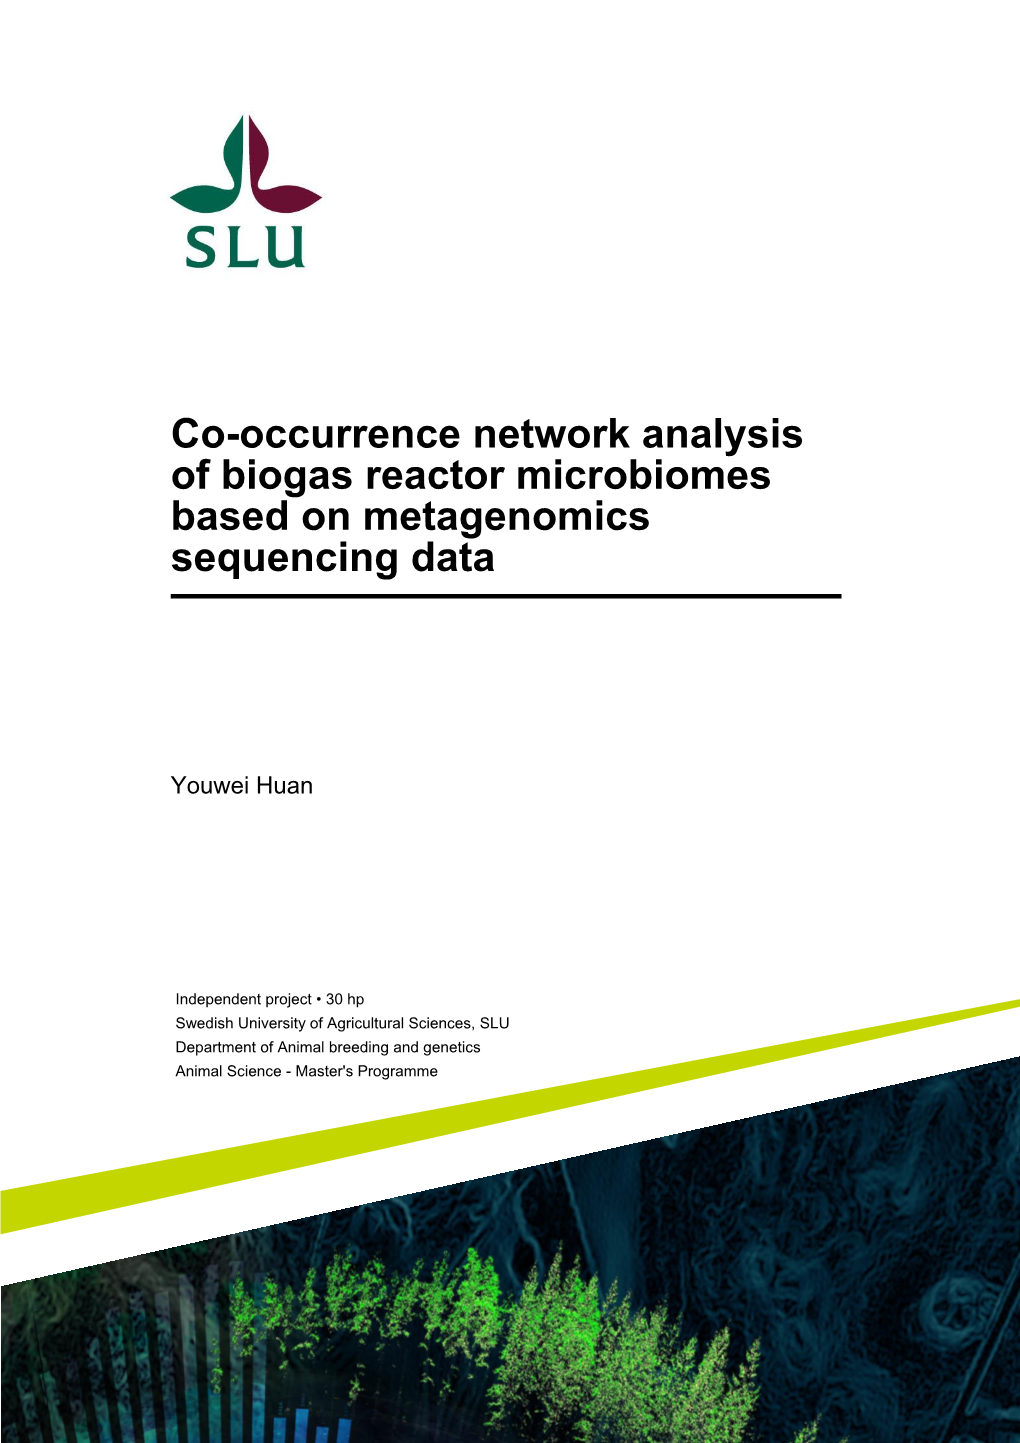 Co-Occurrence Network Analysis of Biogas Reactor Microbiomes Based on Metagenomics Sequencing Data